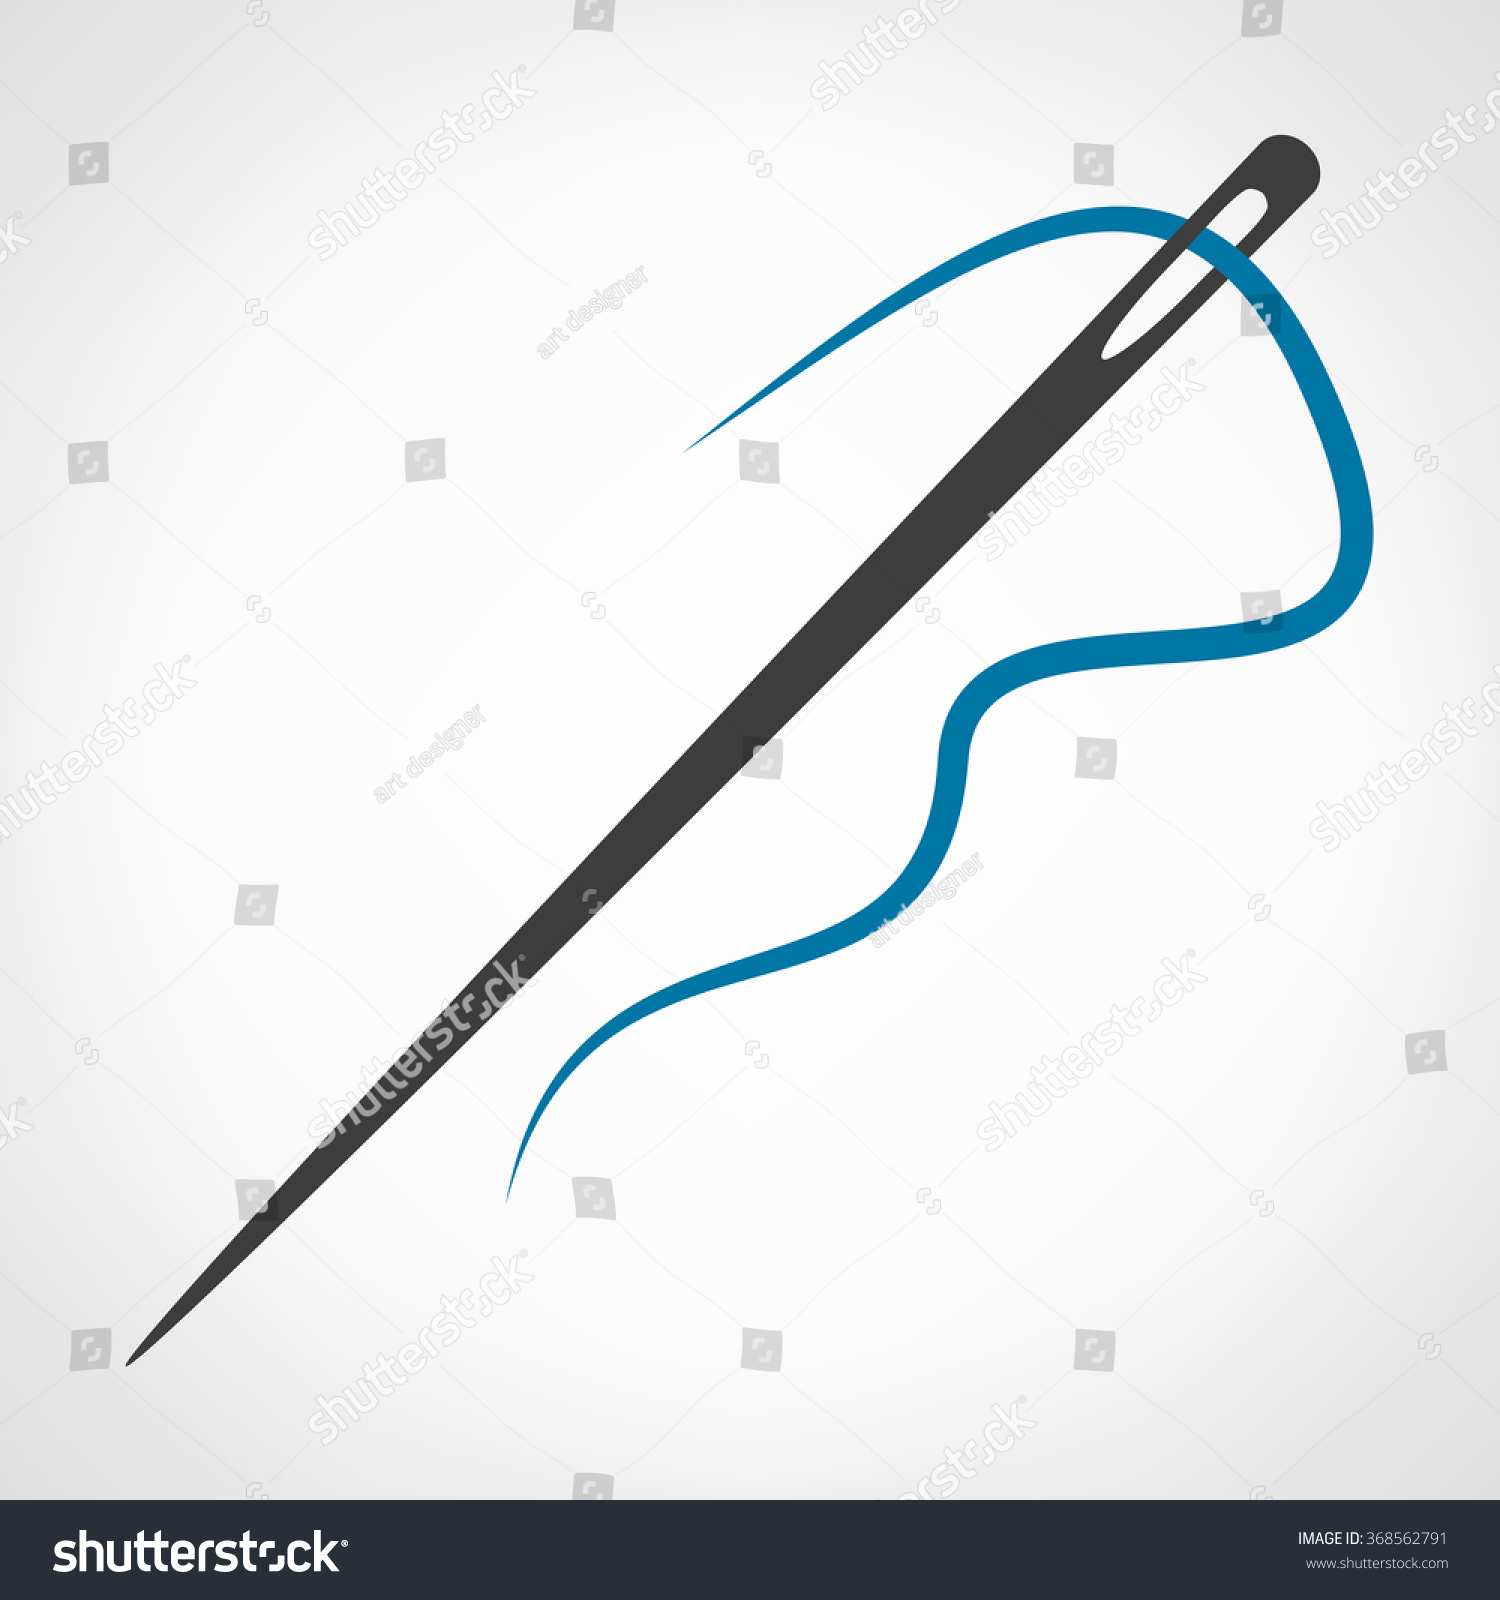 Needle With Thread Sewing Vector Logo - 368562791 : Shutterstock